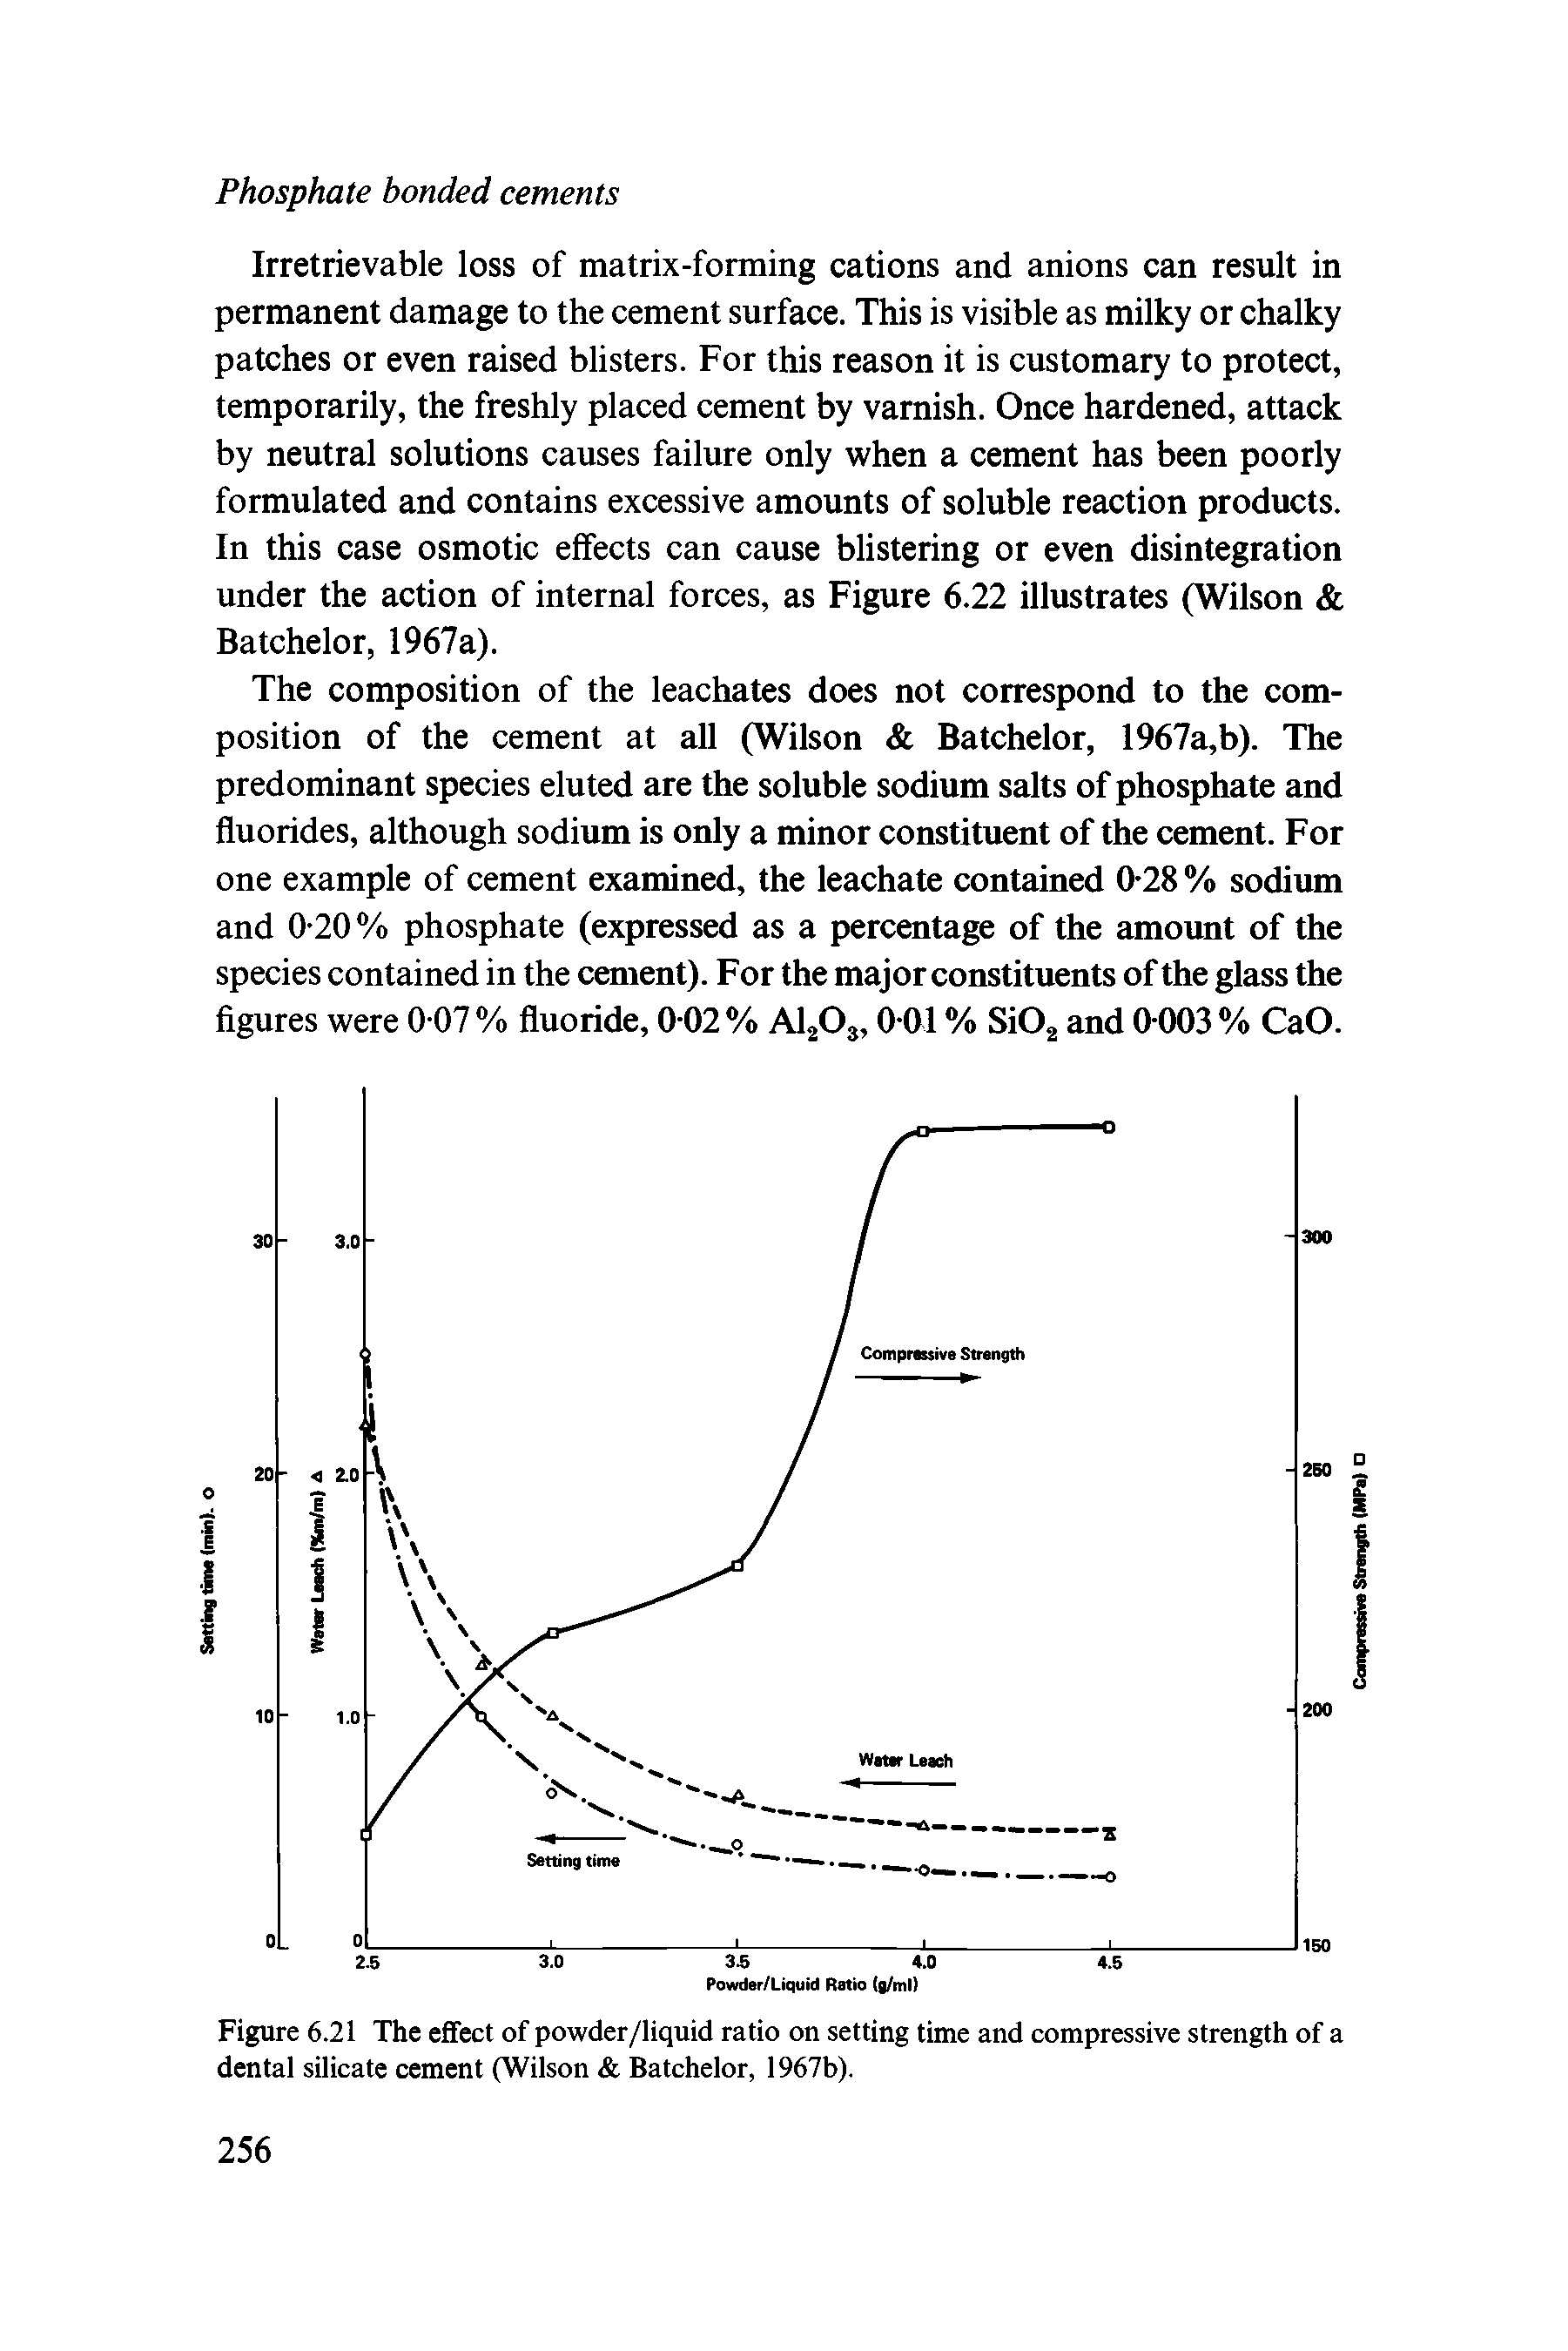 Figure 6.21 The effect of powder/liquid ratio on setting time and compressive strength of a dental silicate cement (Wilson Batchelor, 1967b).